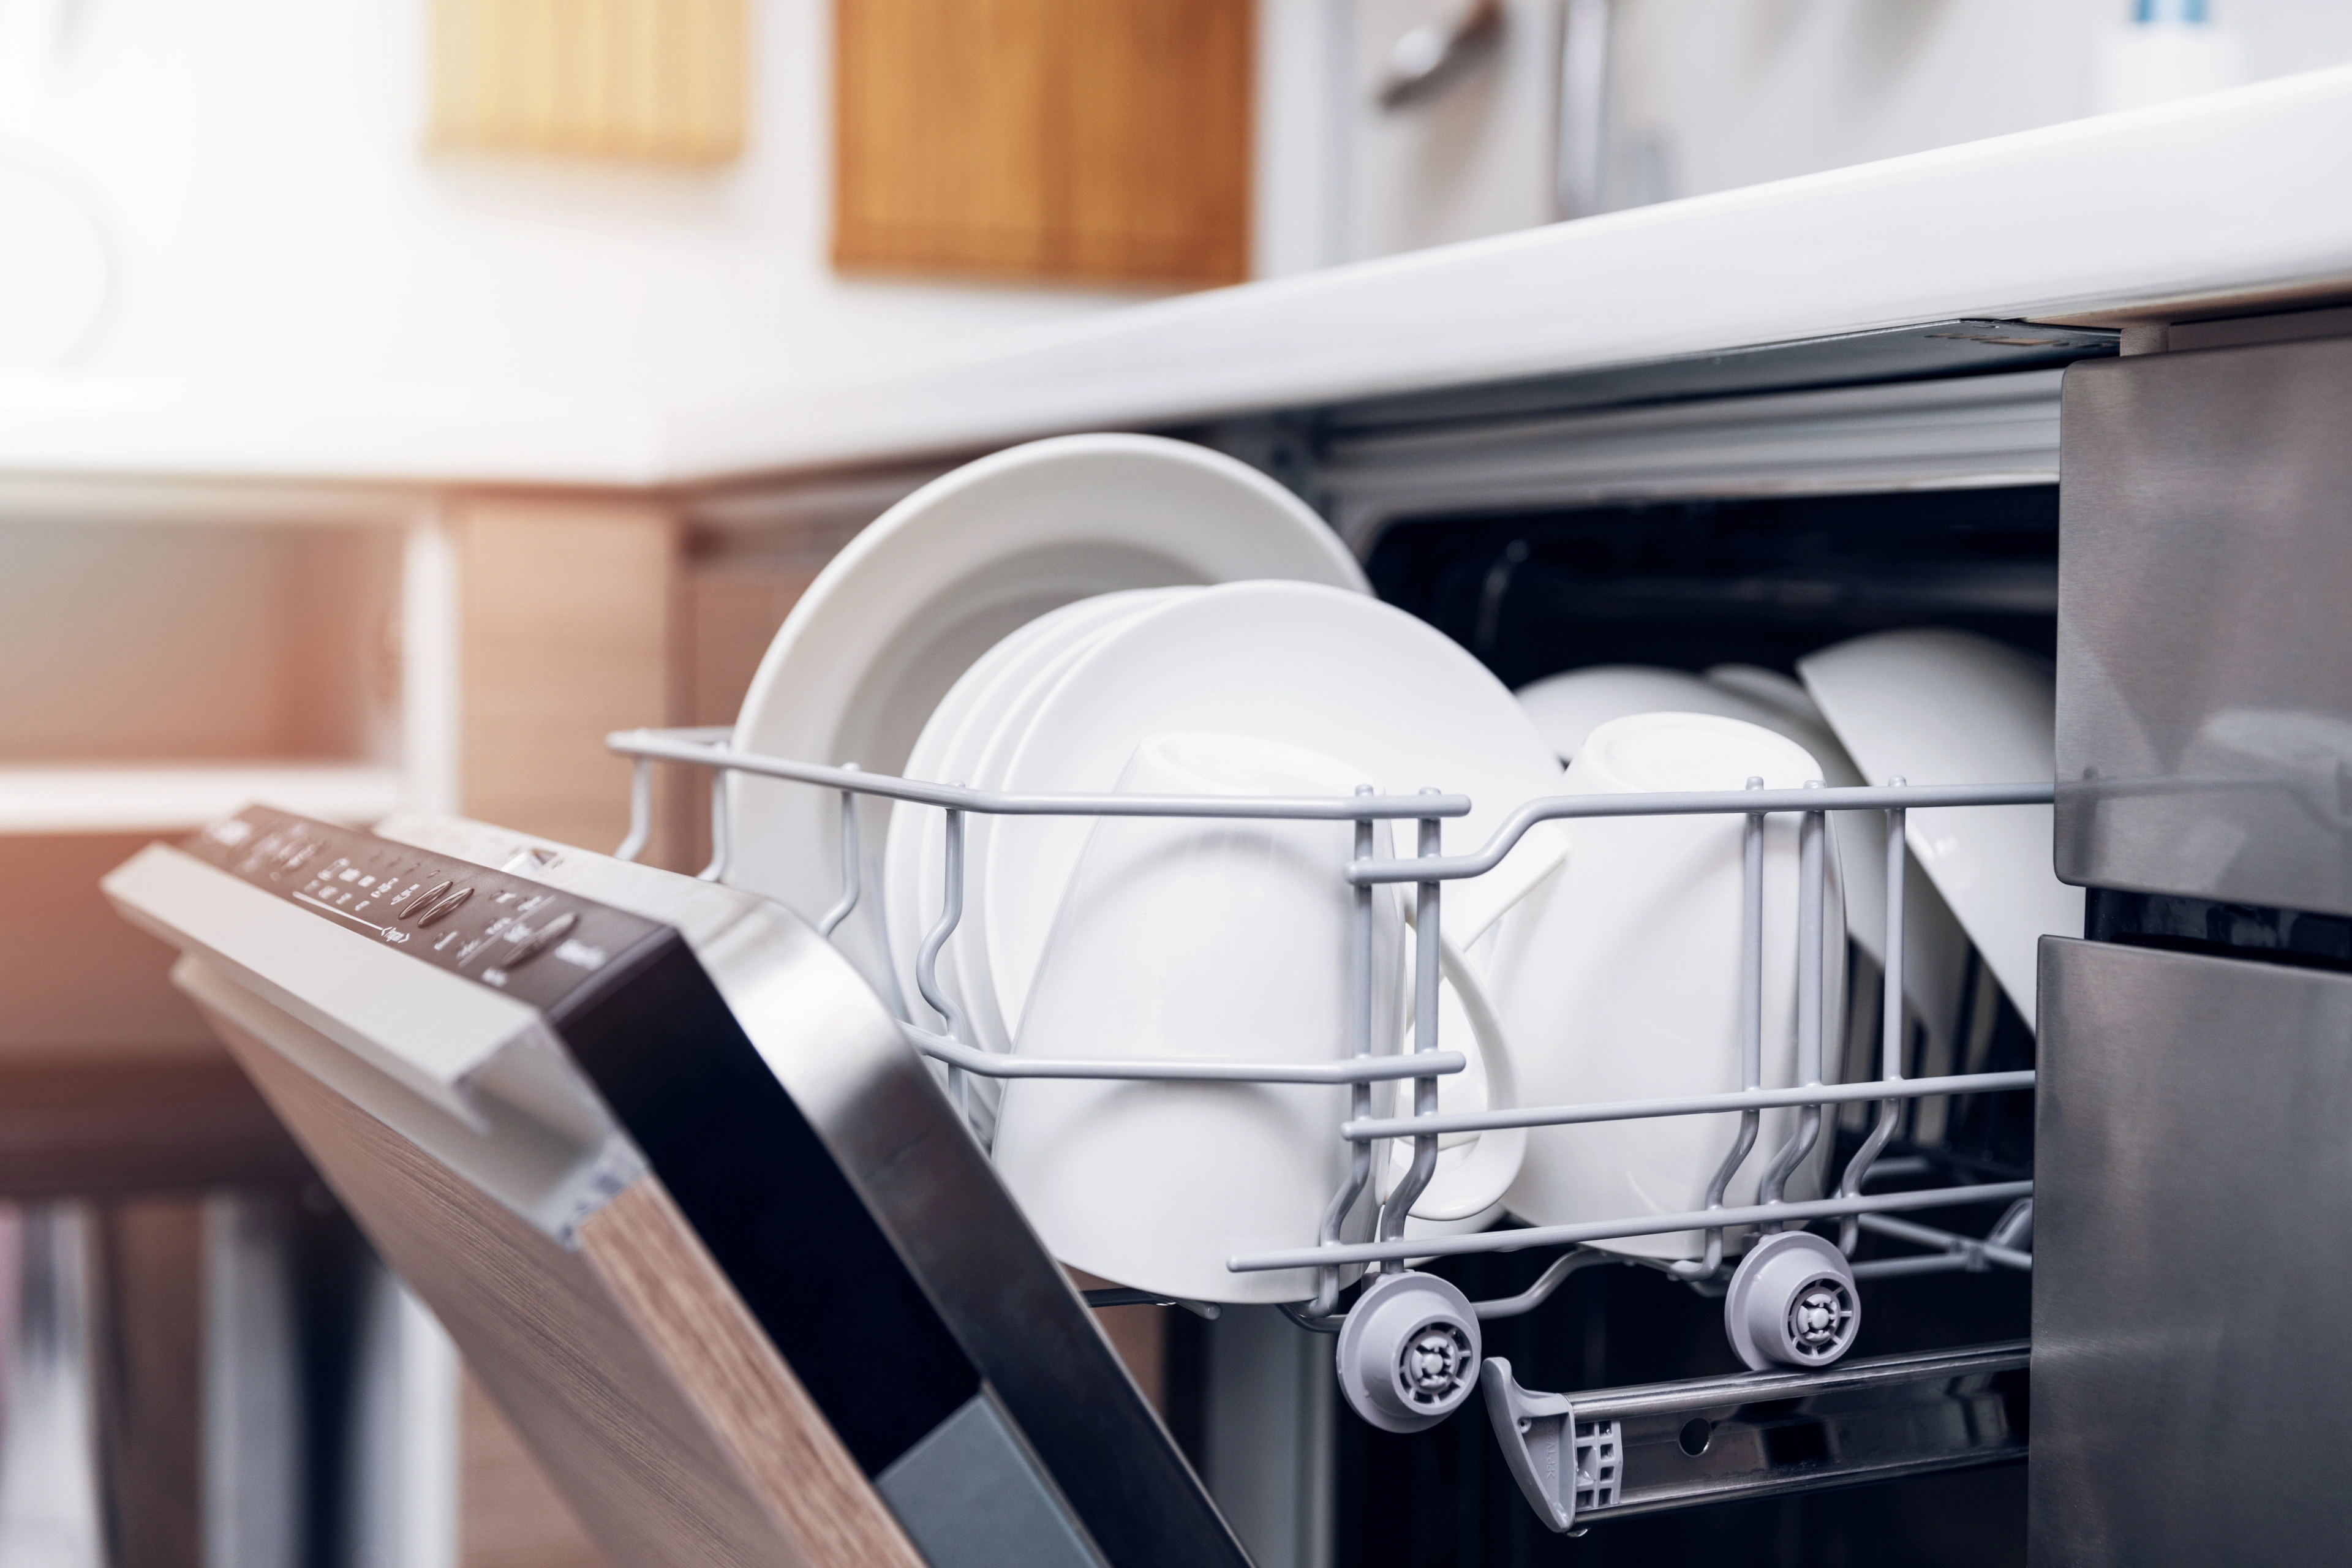 IS_Industry_Appliances_Application_Dishwasher